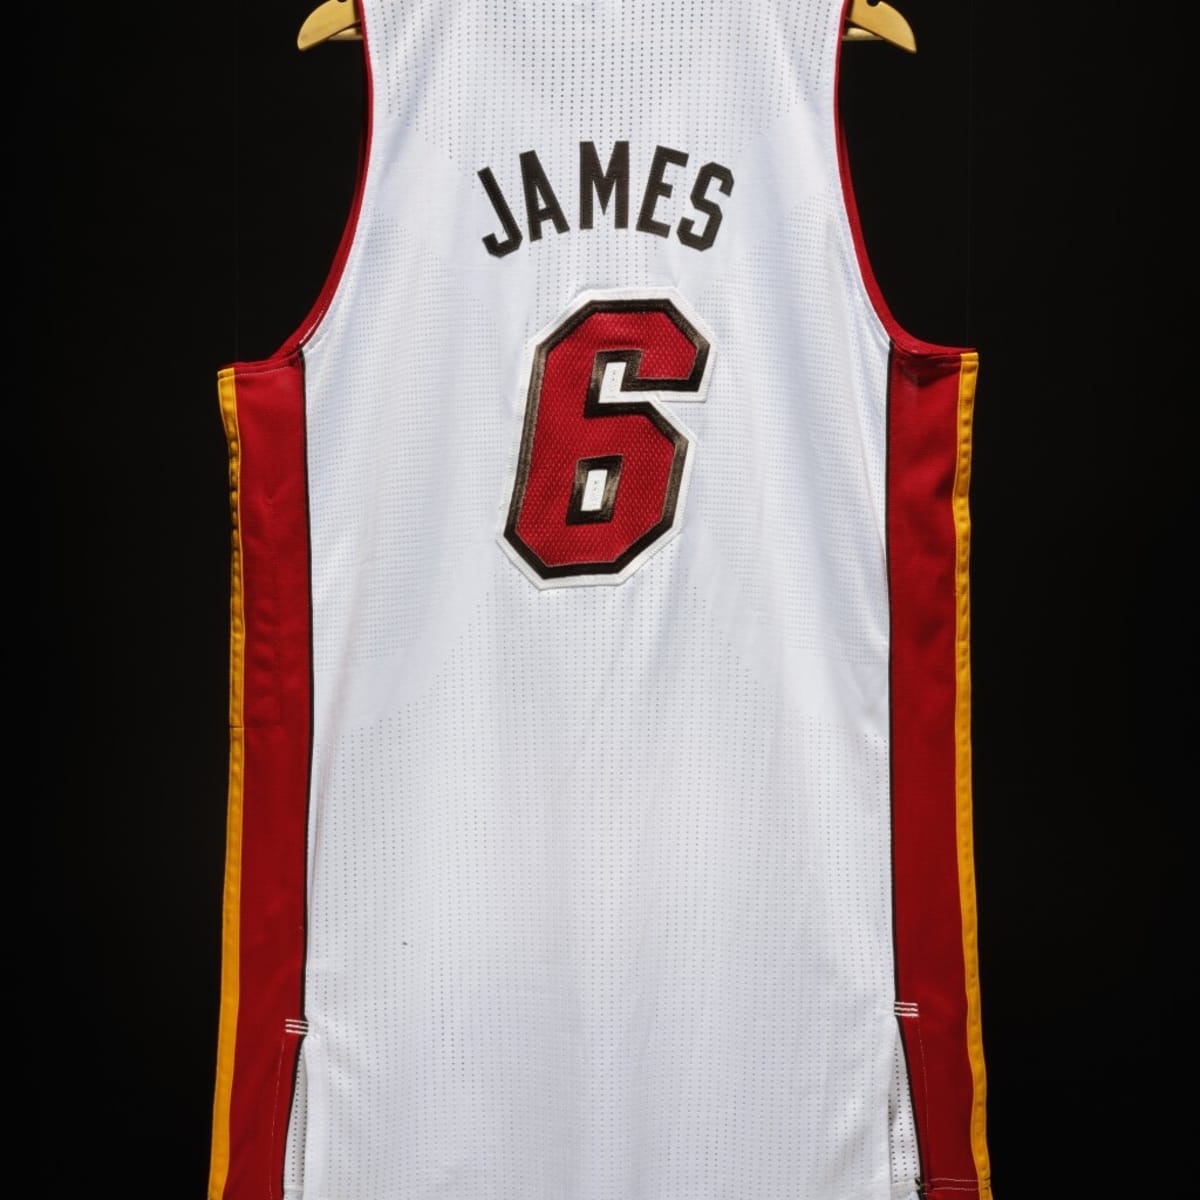 LeBron James Signed 2013 Miami Heat NBA Finals MVP Patch Authentic Jersey